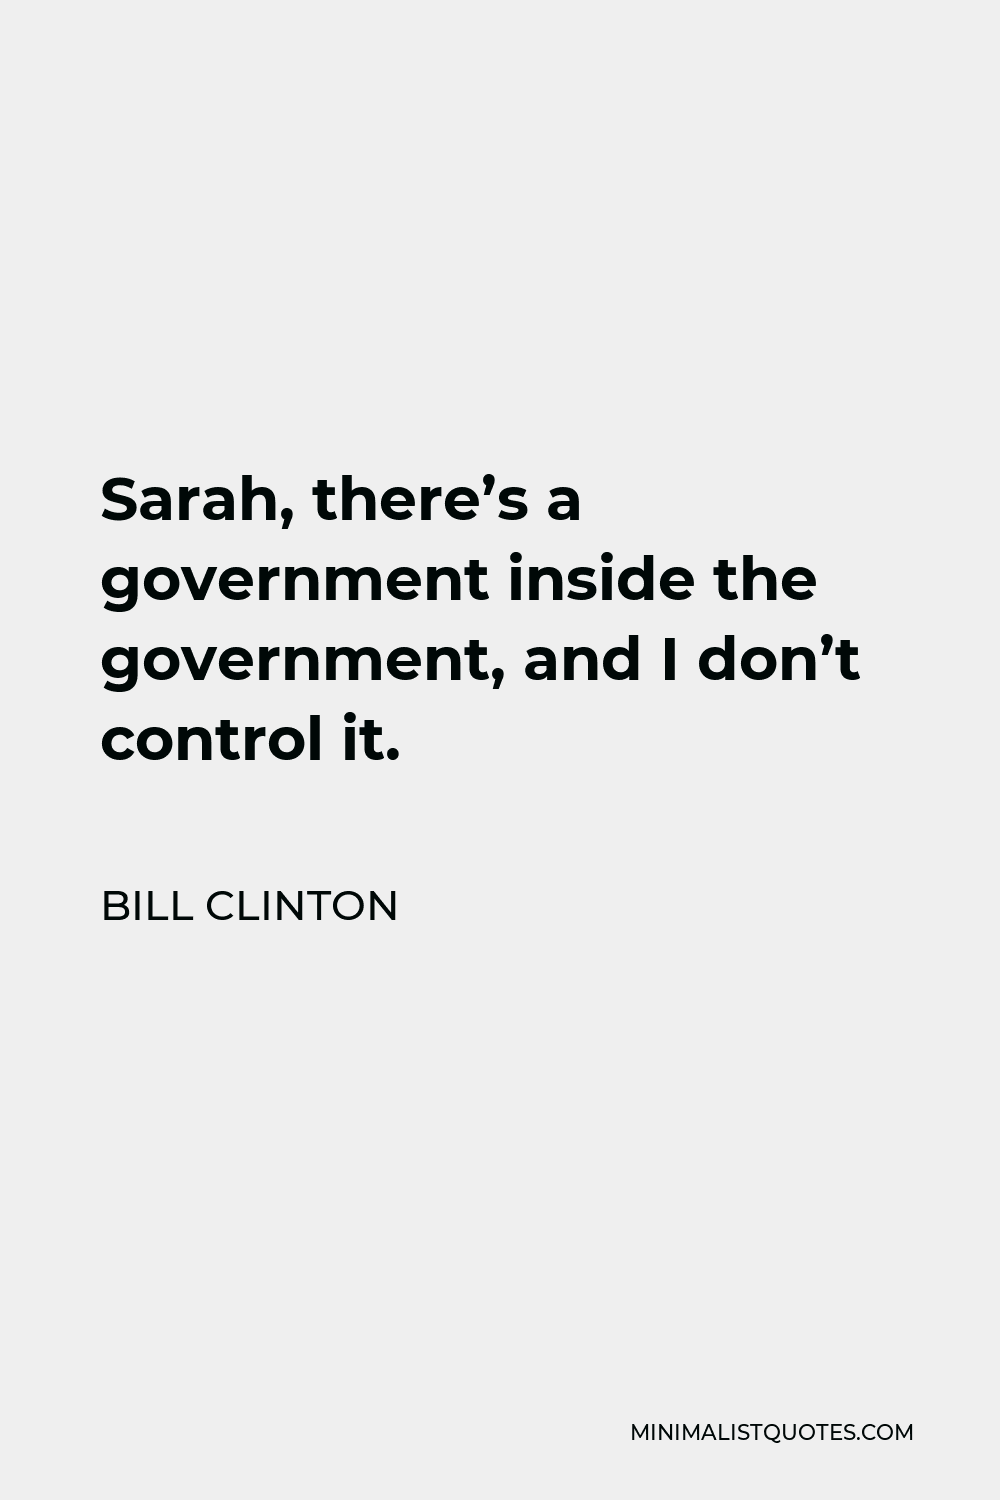 Bill Clinton Quote - Sarah, there’s a government inside the government, and I don’t control it.